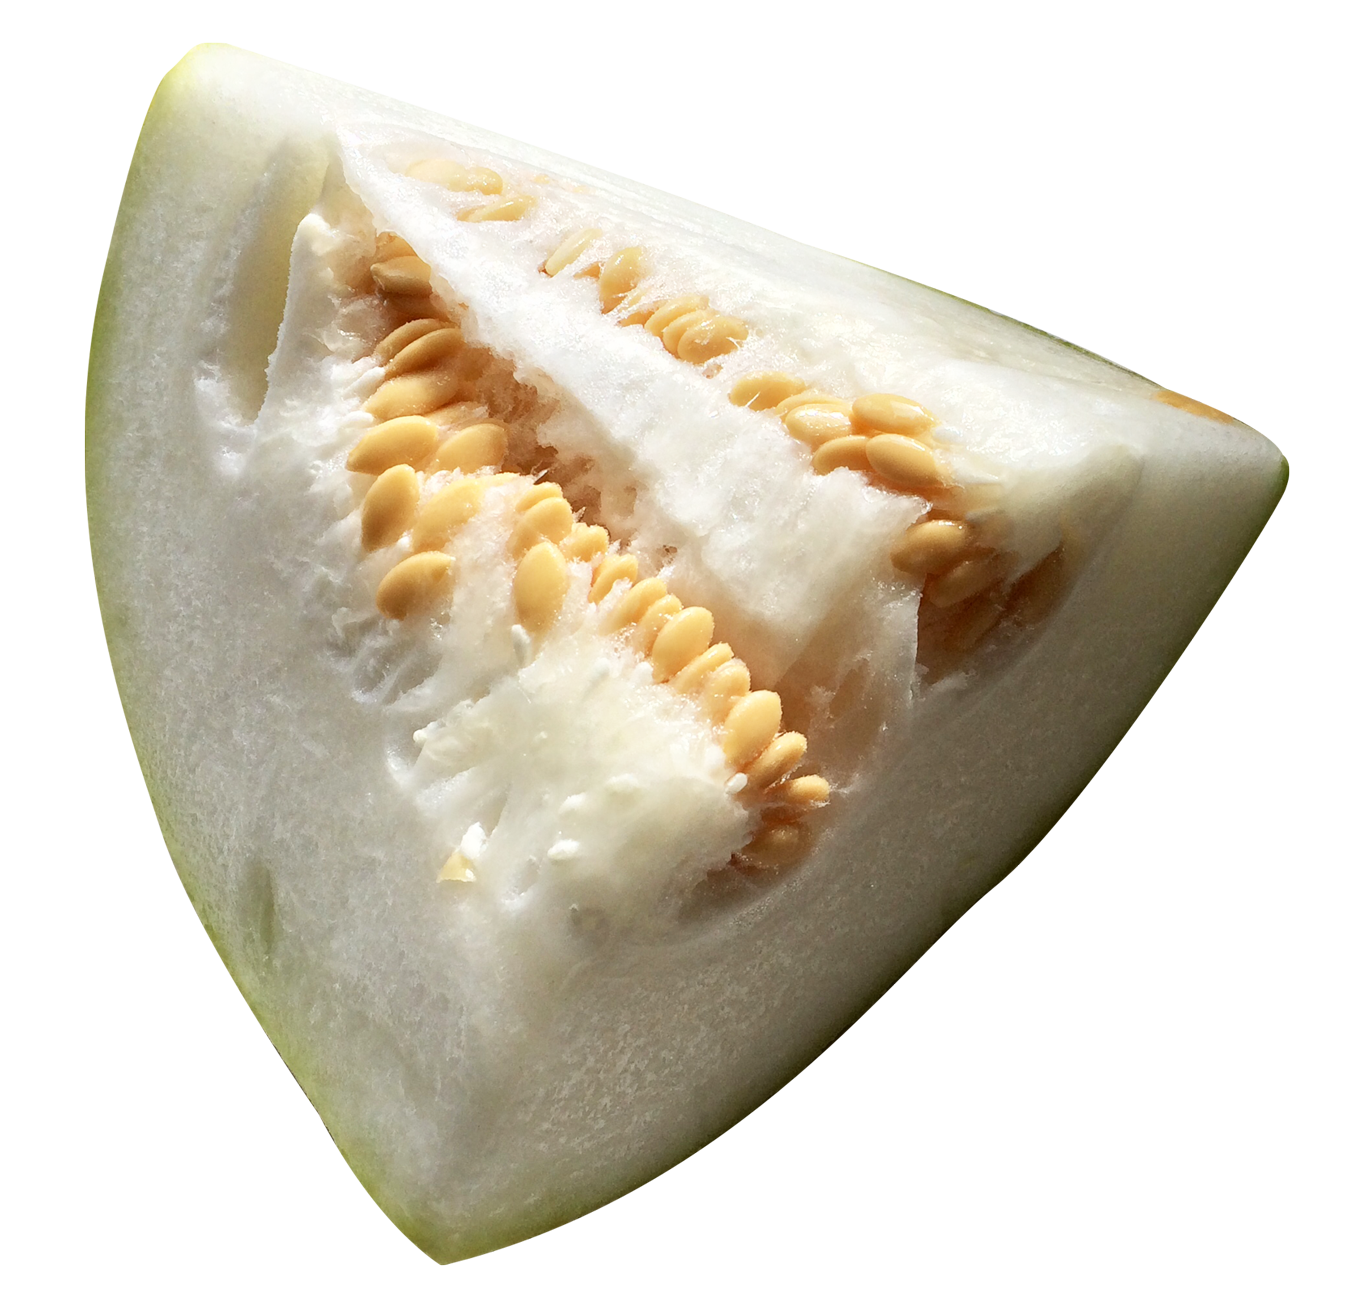 A Piece Of Melon With Seeds